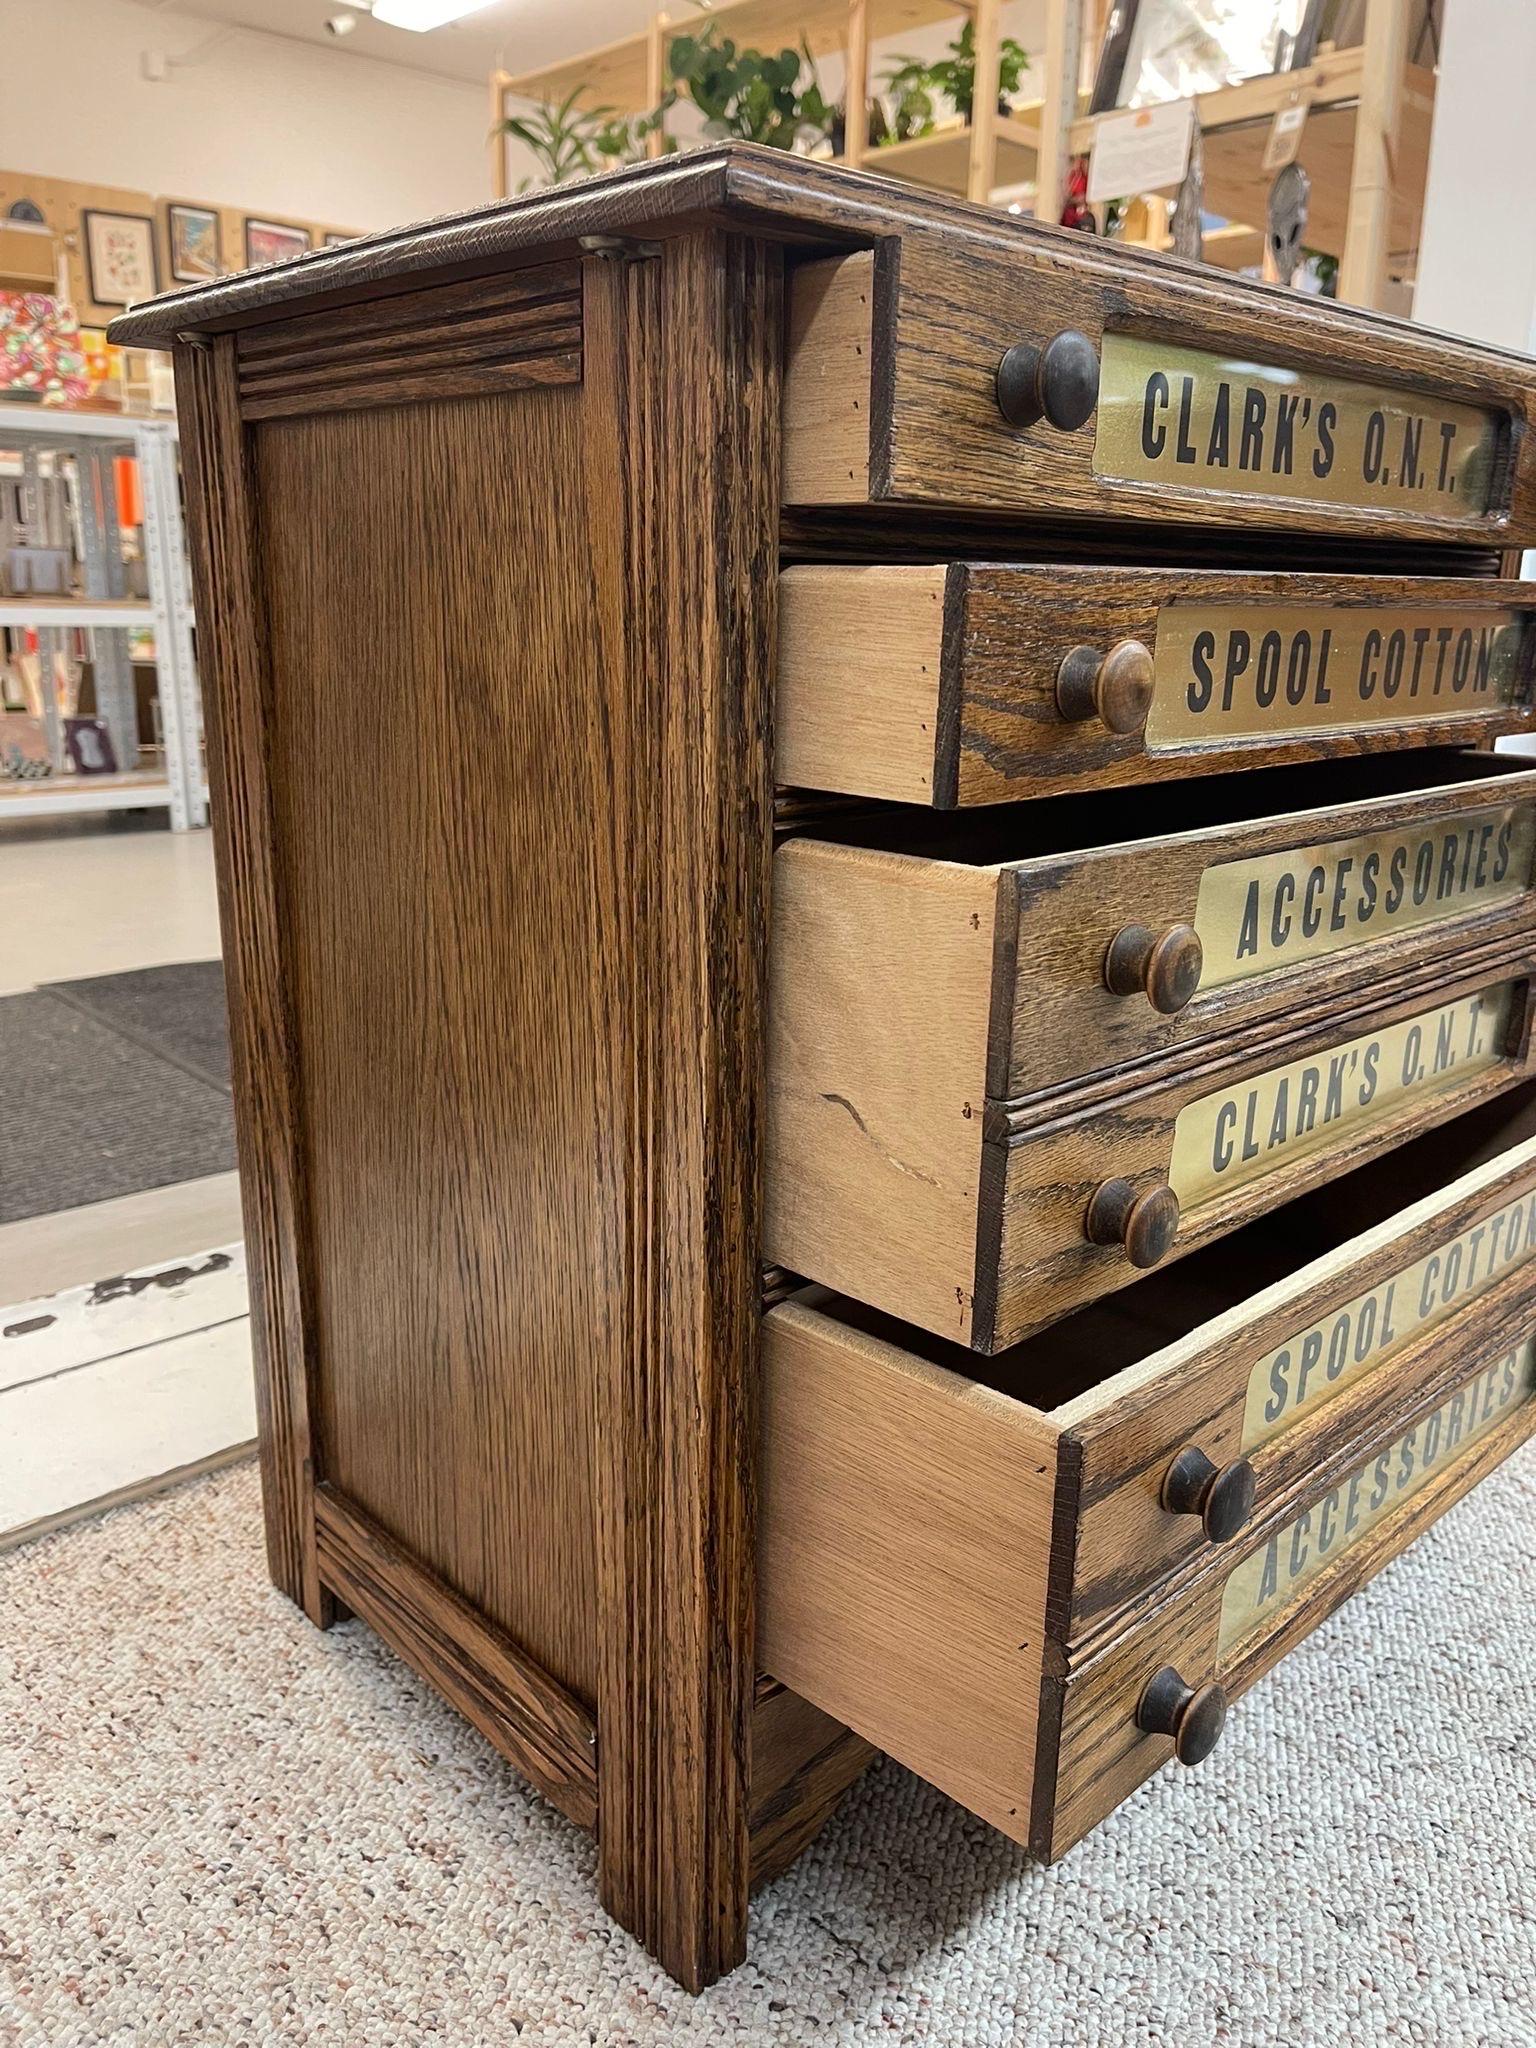 walnut Toned 4 Drawer Spool Cabinet. Wooden Handles with Brass Toned Labels on the Drawers. Lower 2 Drawers are Larger in Size. Thread Pictured is Included with the Sale of the Cabinet. Vintage Condition Consistent with Age as Pictured. 